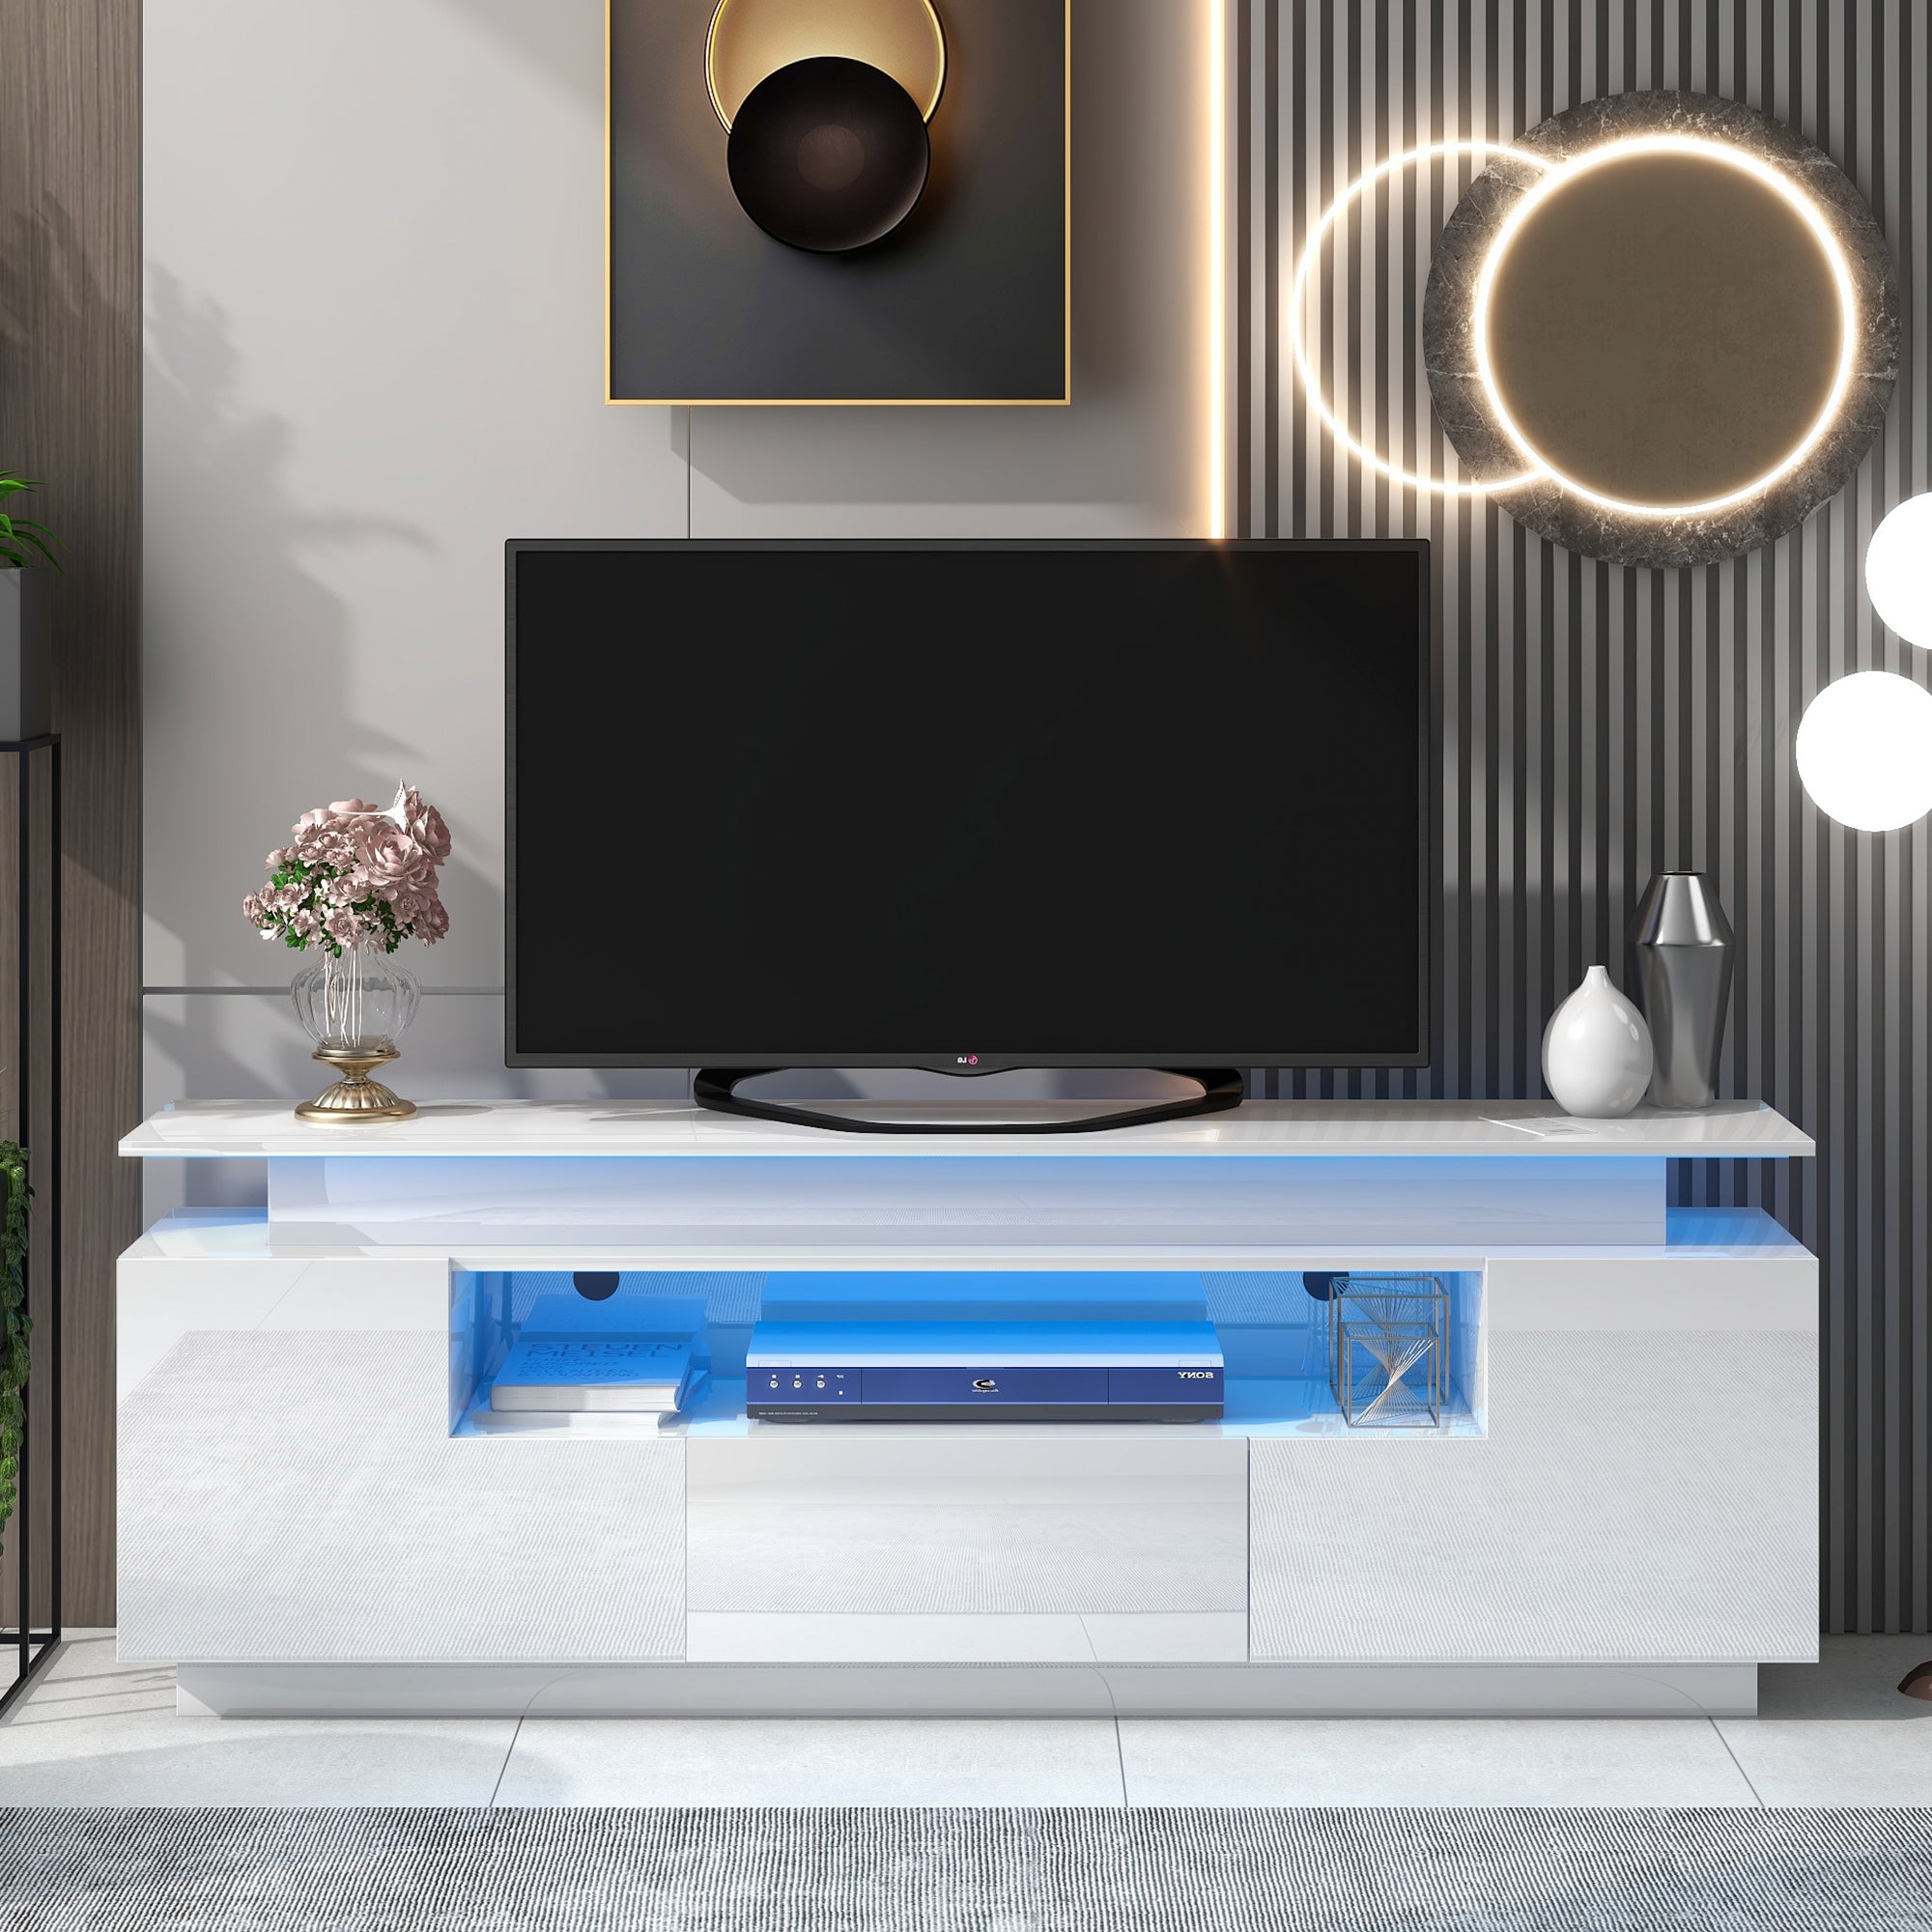 ON-TREND Modern Stylish Practical TV Cabinet with Color Changing LED Lights for TVs Above 75"(White)